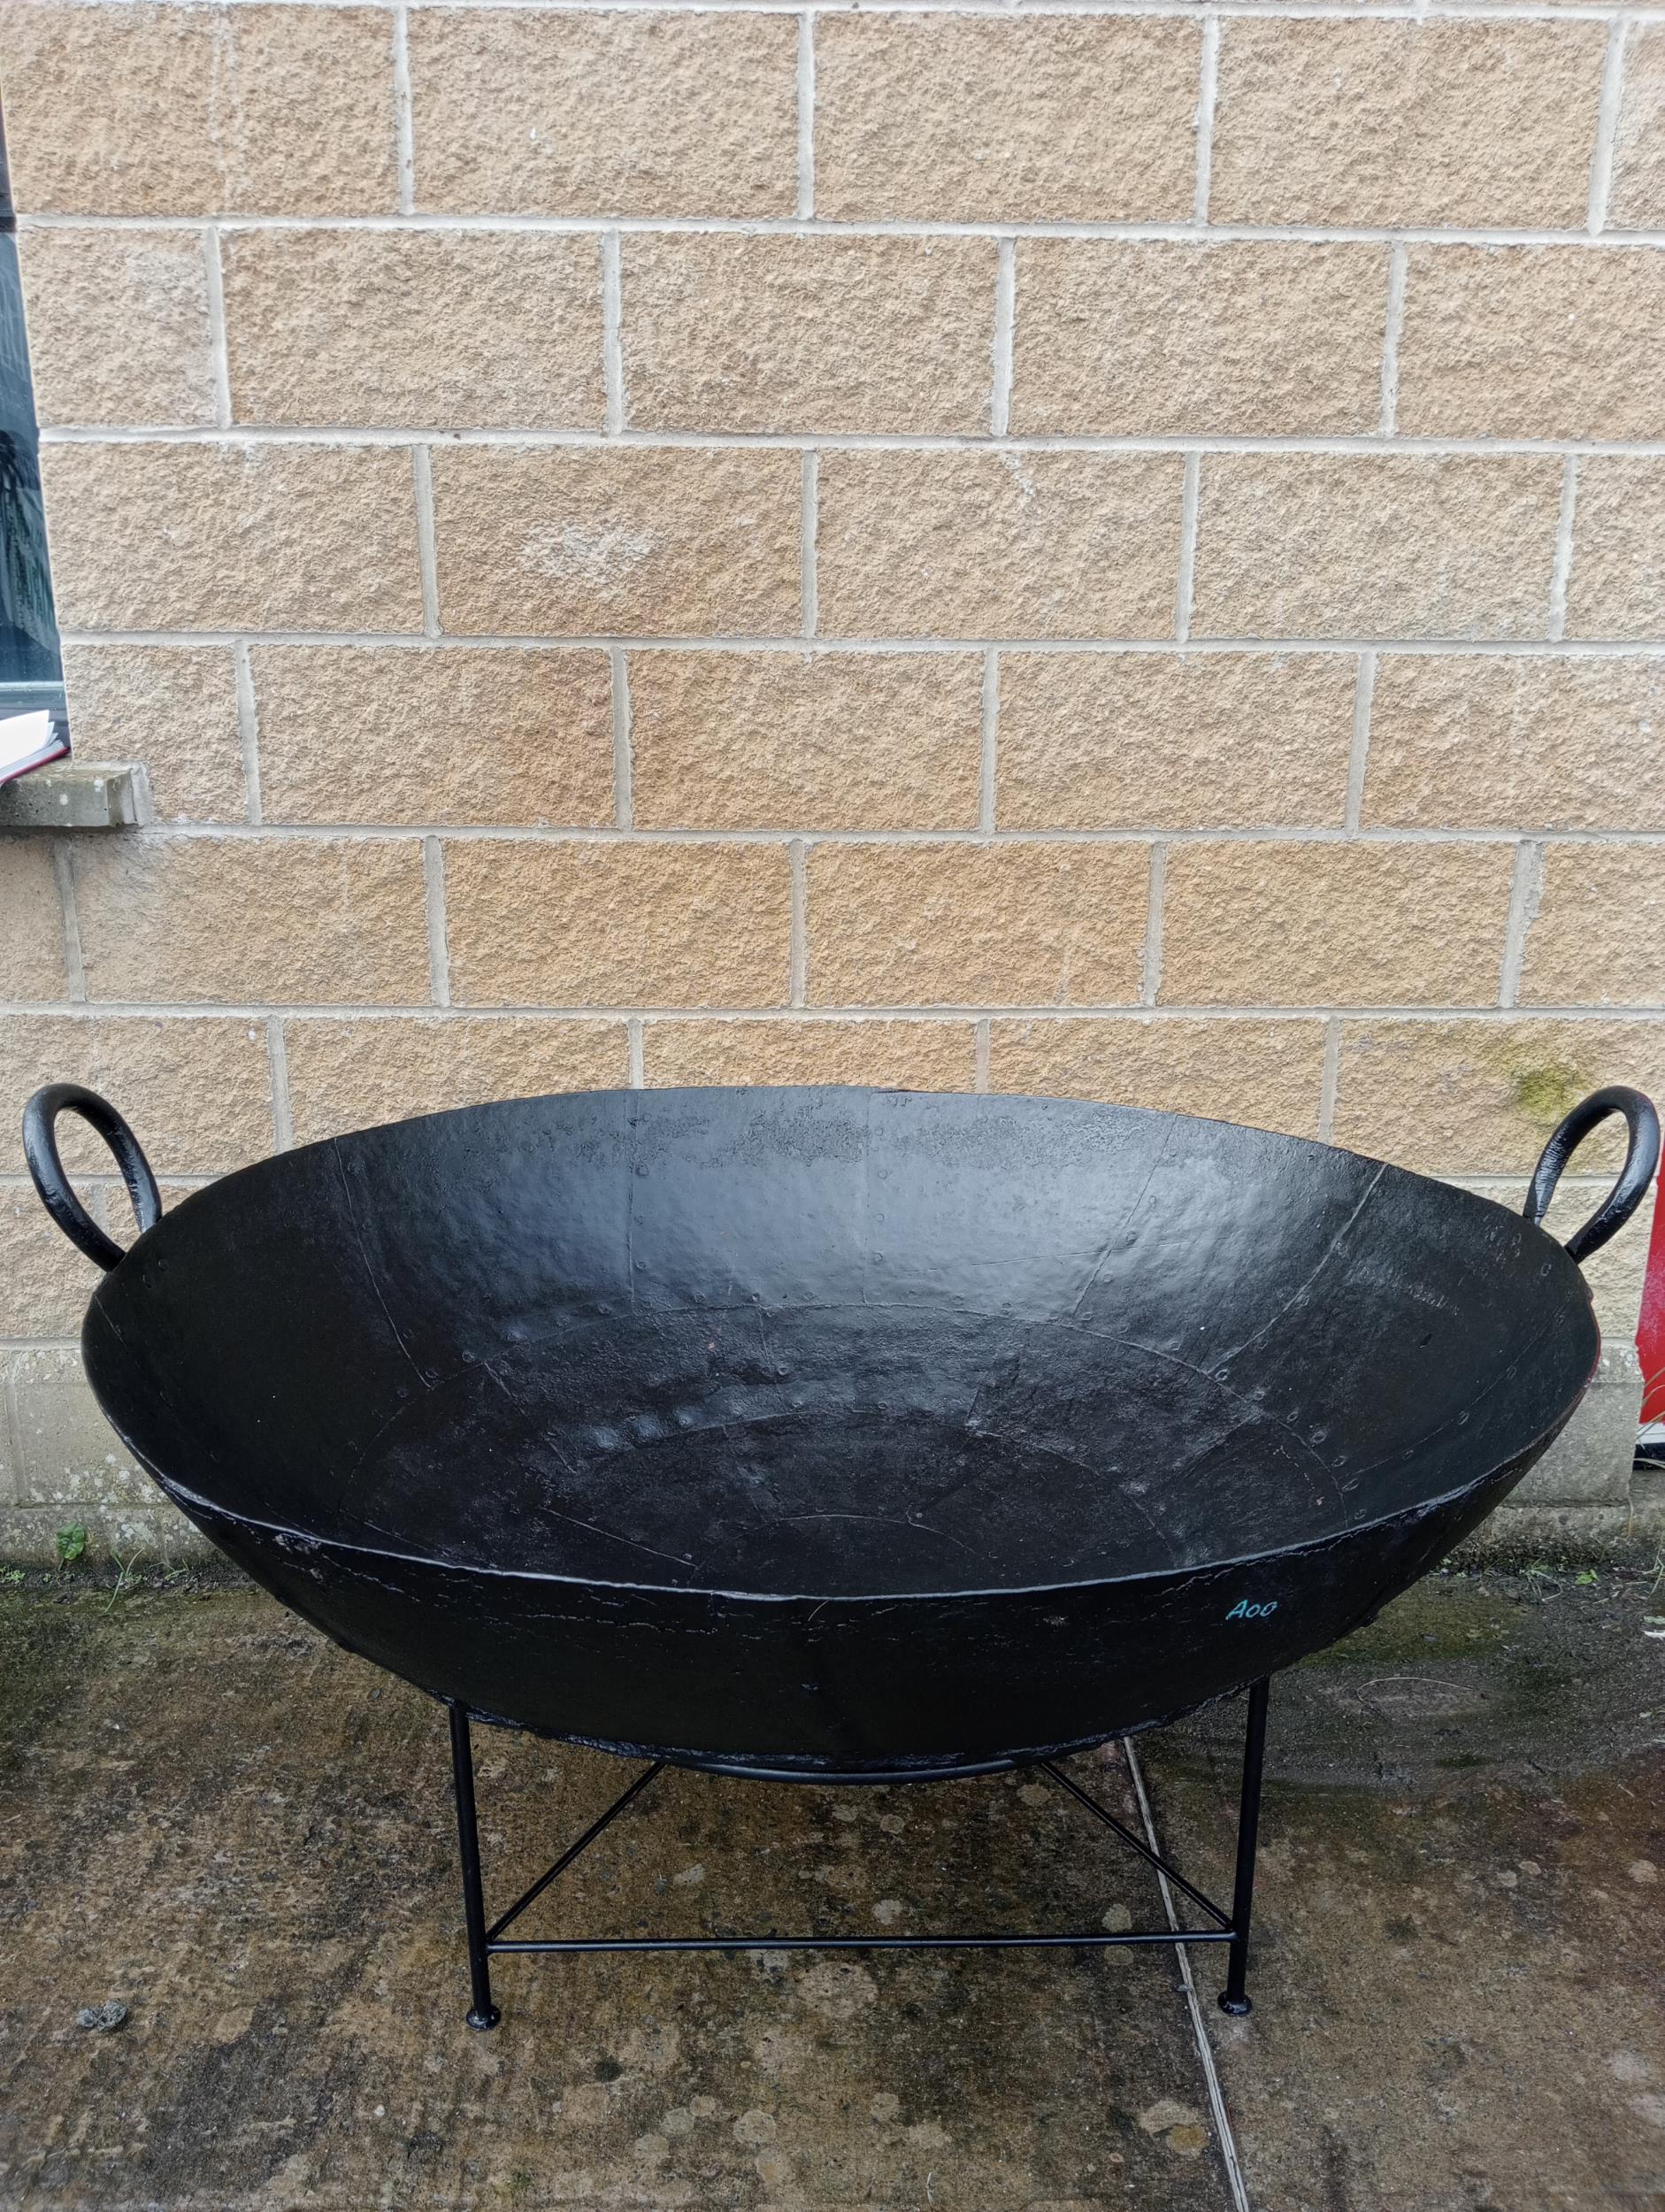 Large steel fire pit {H 86cm x Dia 130cm }. (NOT AVAILABLE TO VIEW IN PERSON) - Bild 5 aus 5